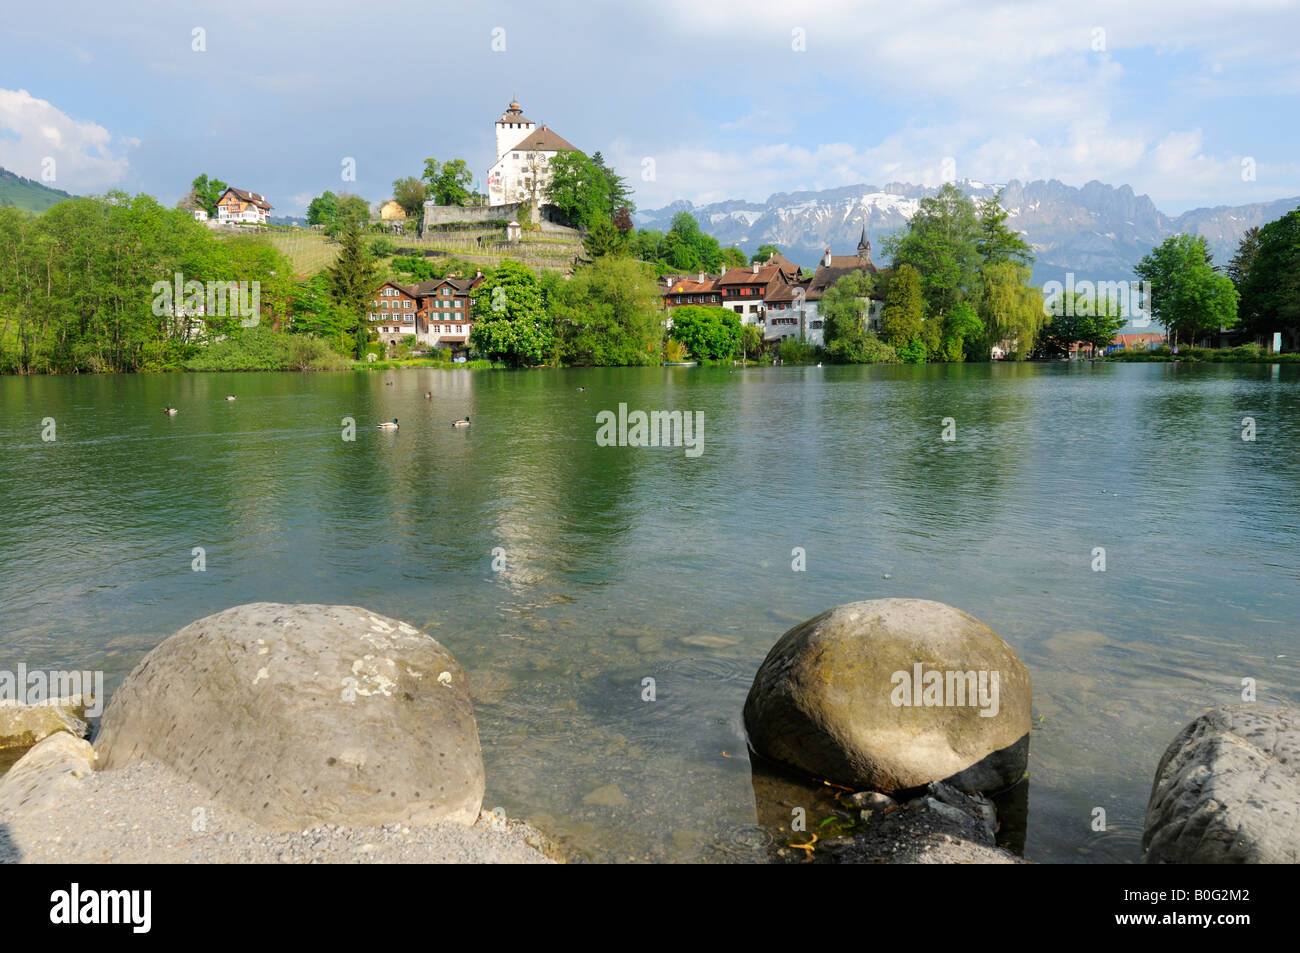 Scenic Lake and Castle Werdenberg in spring, Rheintal CH Stock Photo